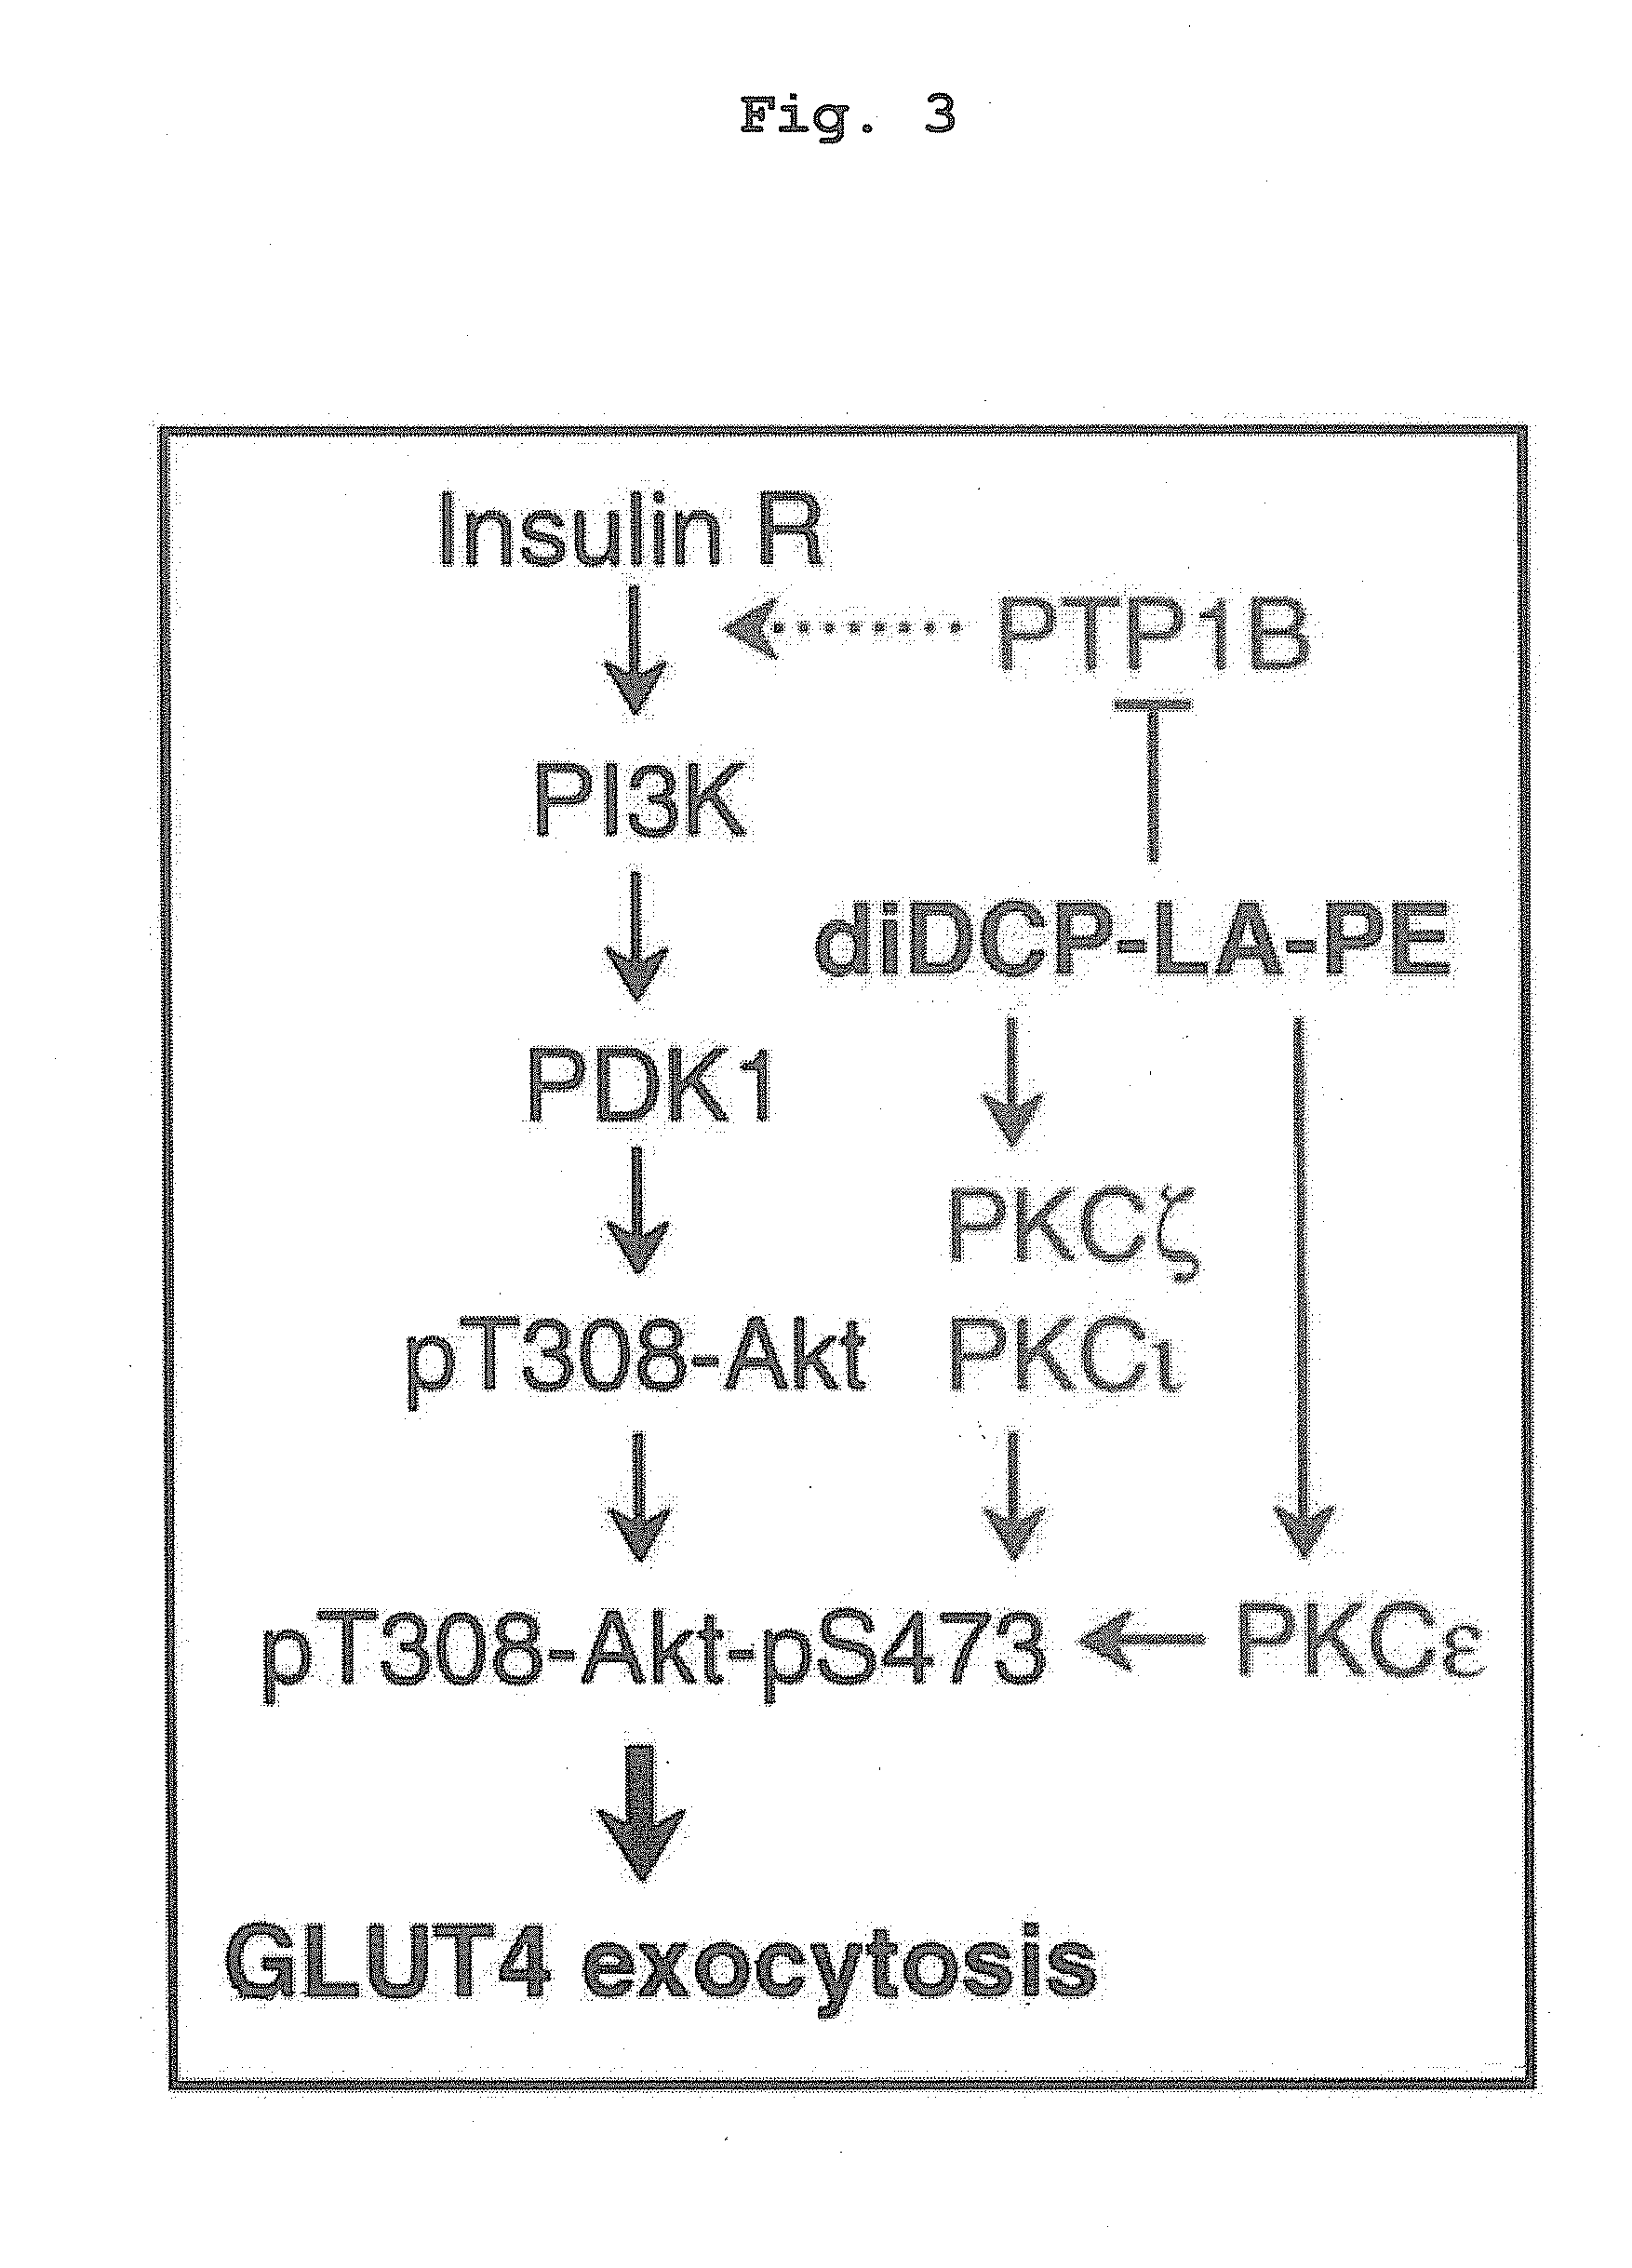 Phospholipid compound containing unsaturated fatty acid derivative having cyclopropane ring